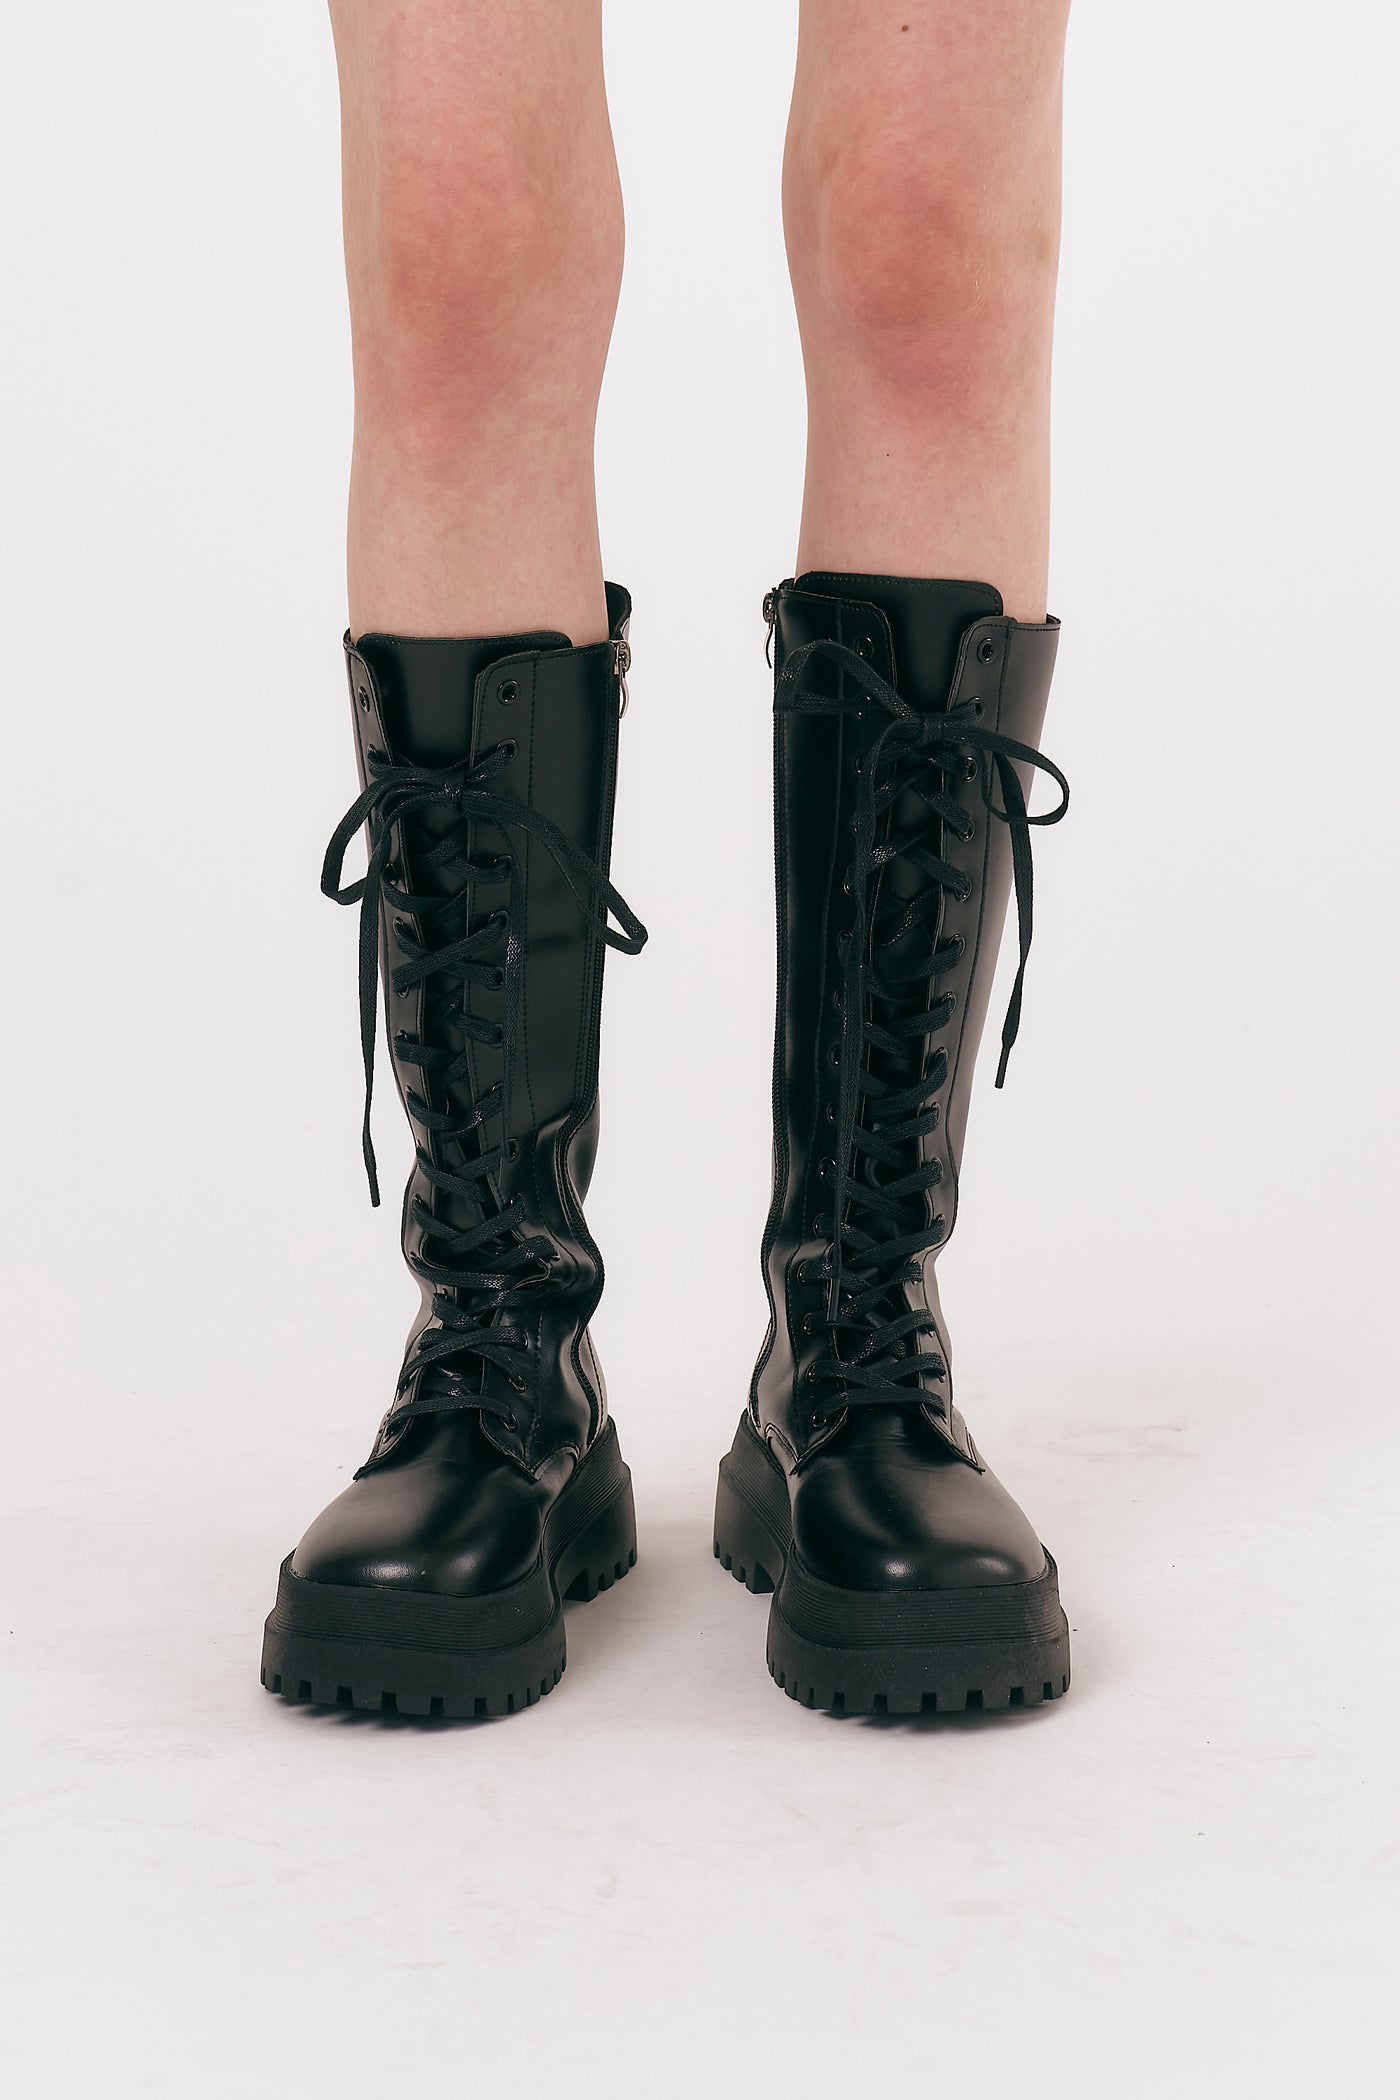 storets.com Milly Chunky Combat Boots